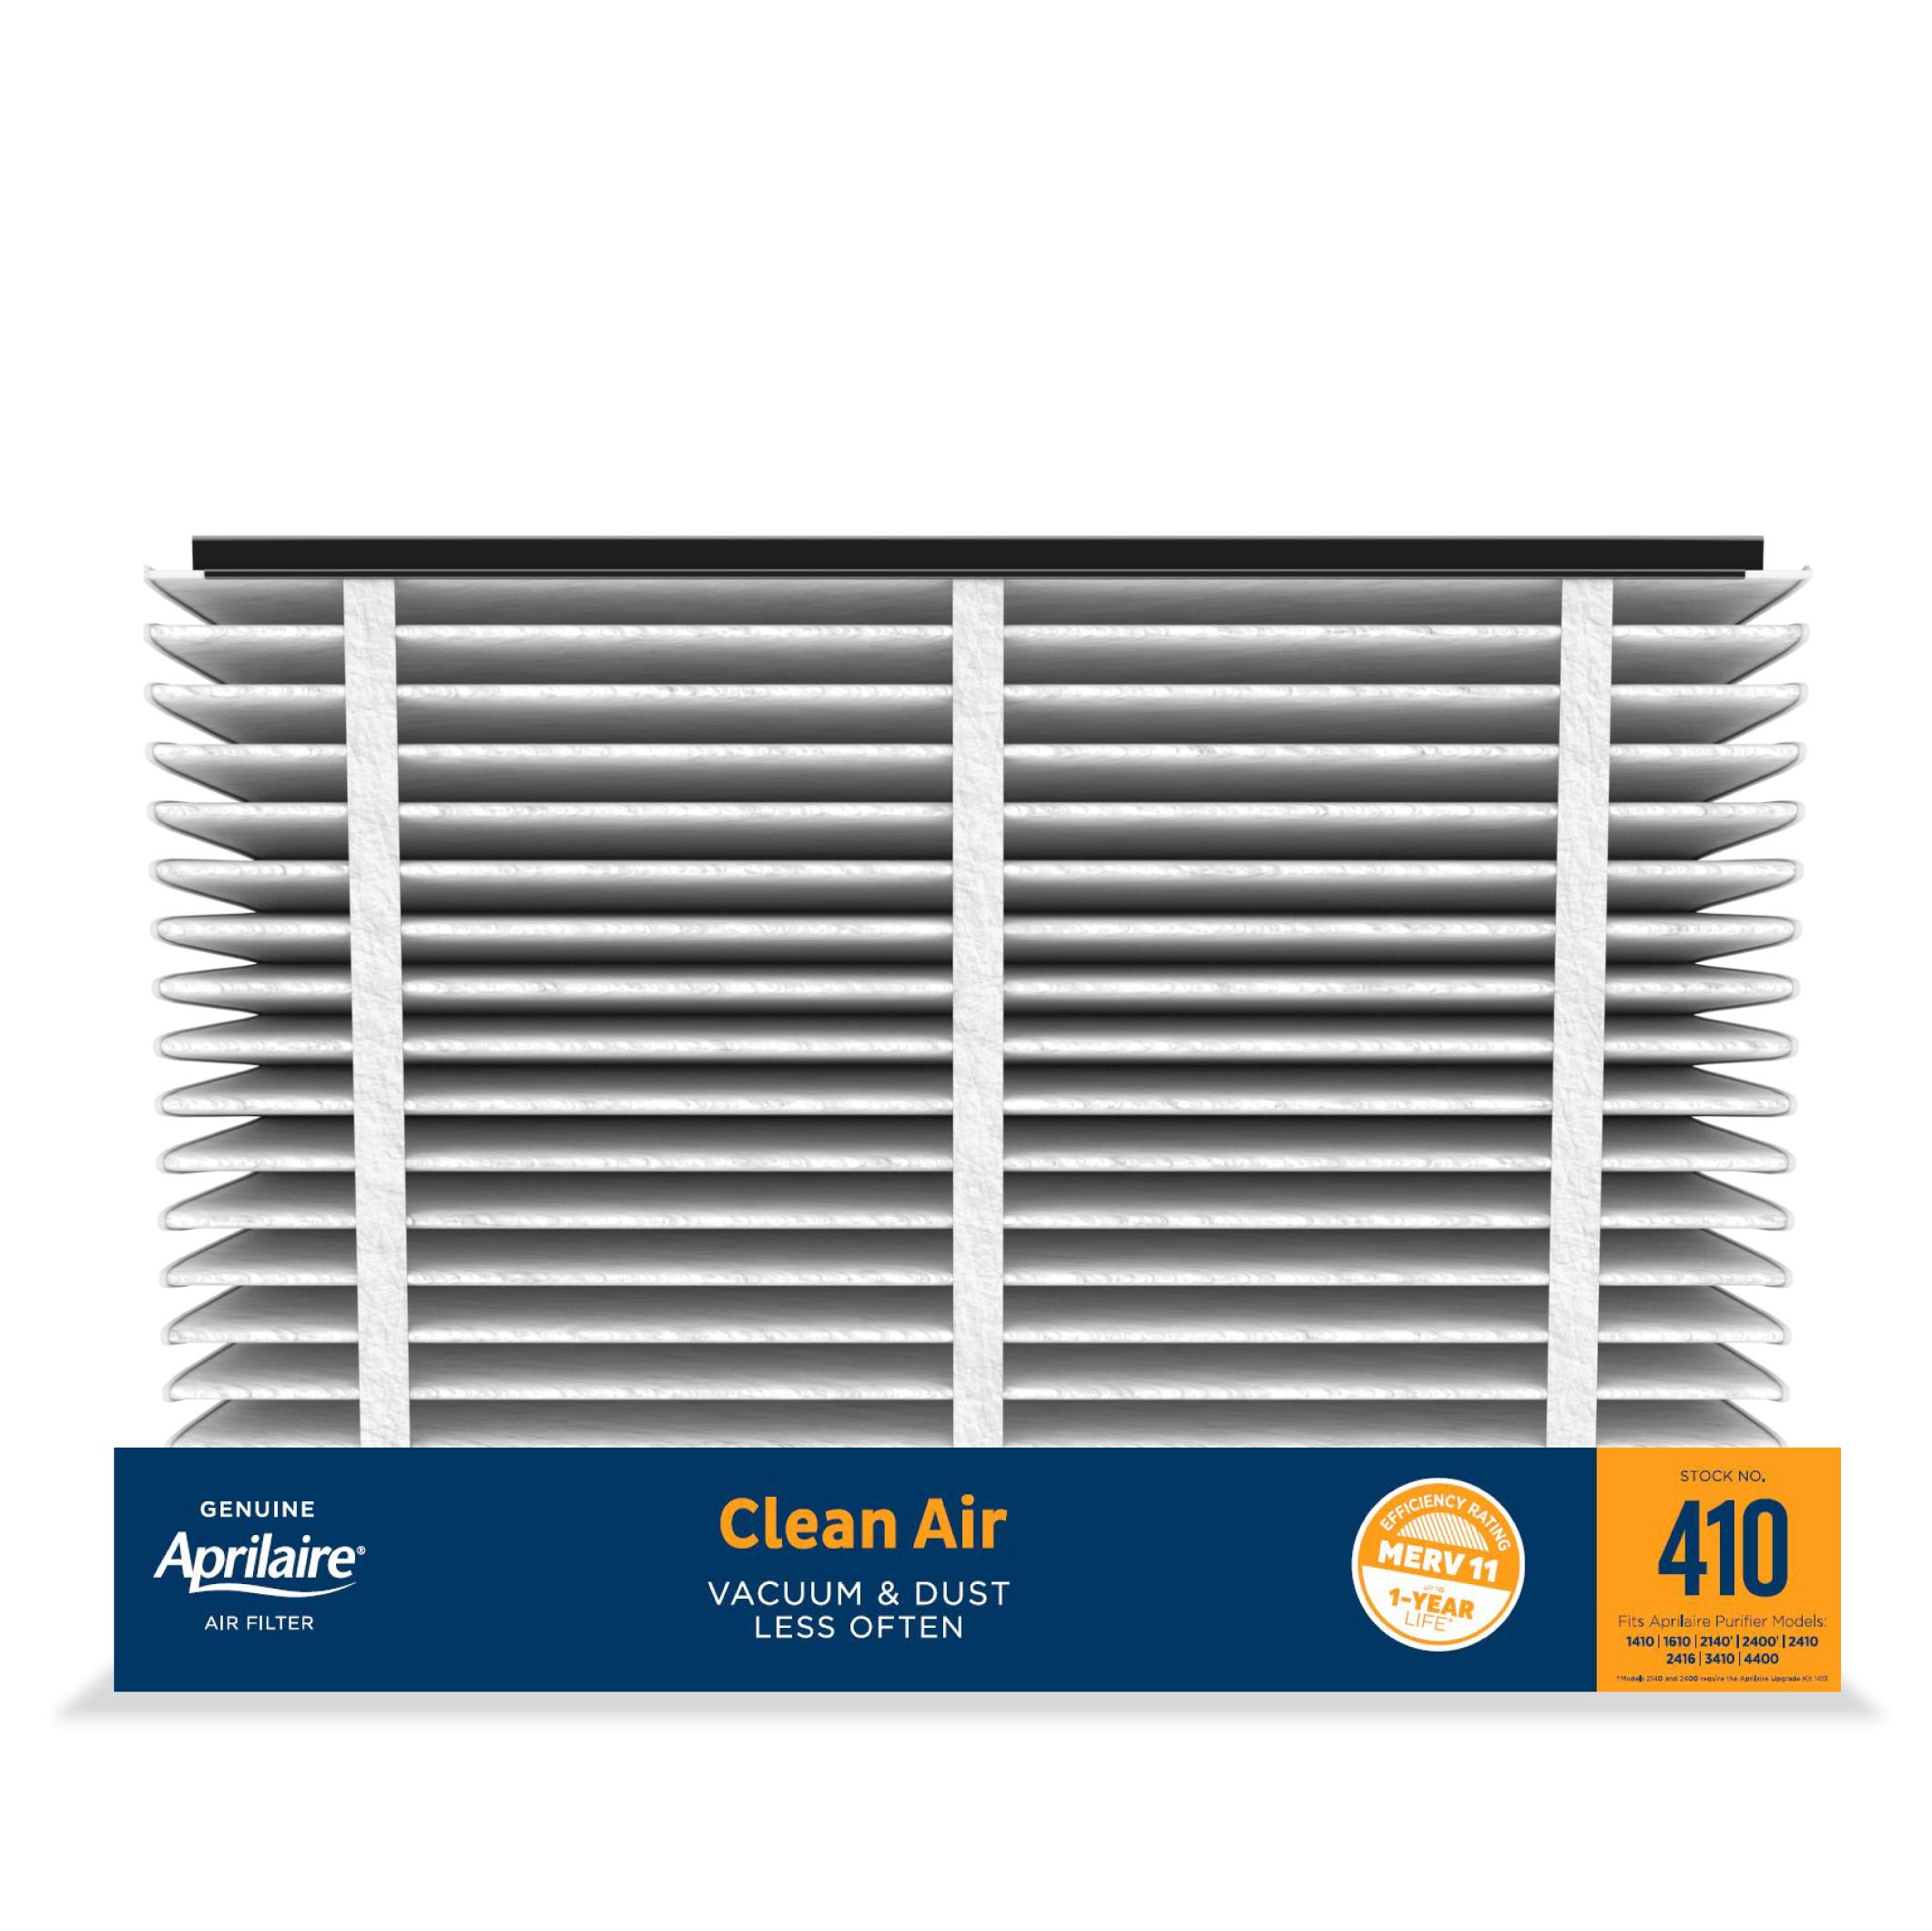 Aprilaire 410 Replacement Furnace Air Filter for Whole ...